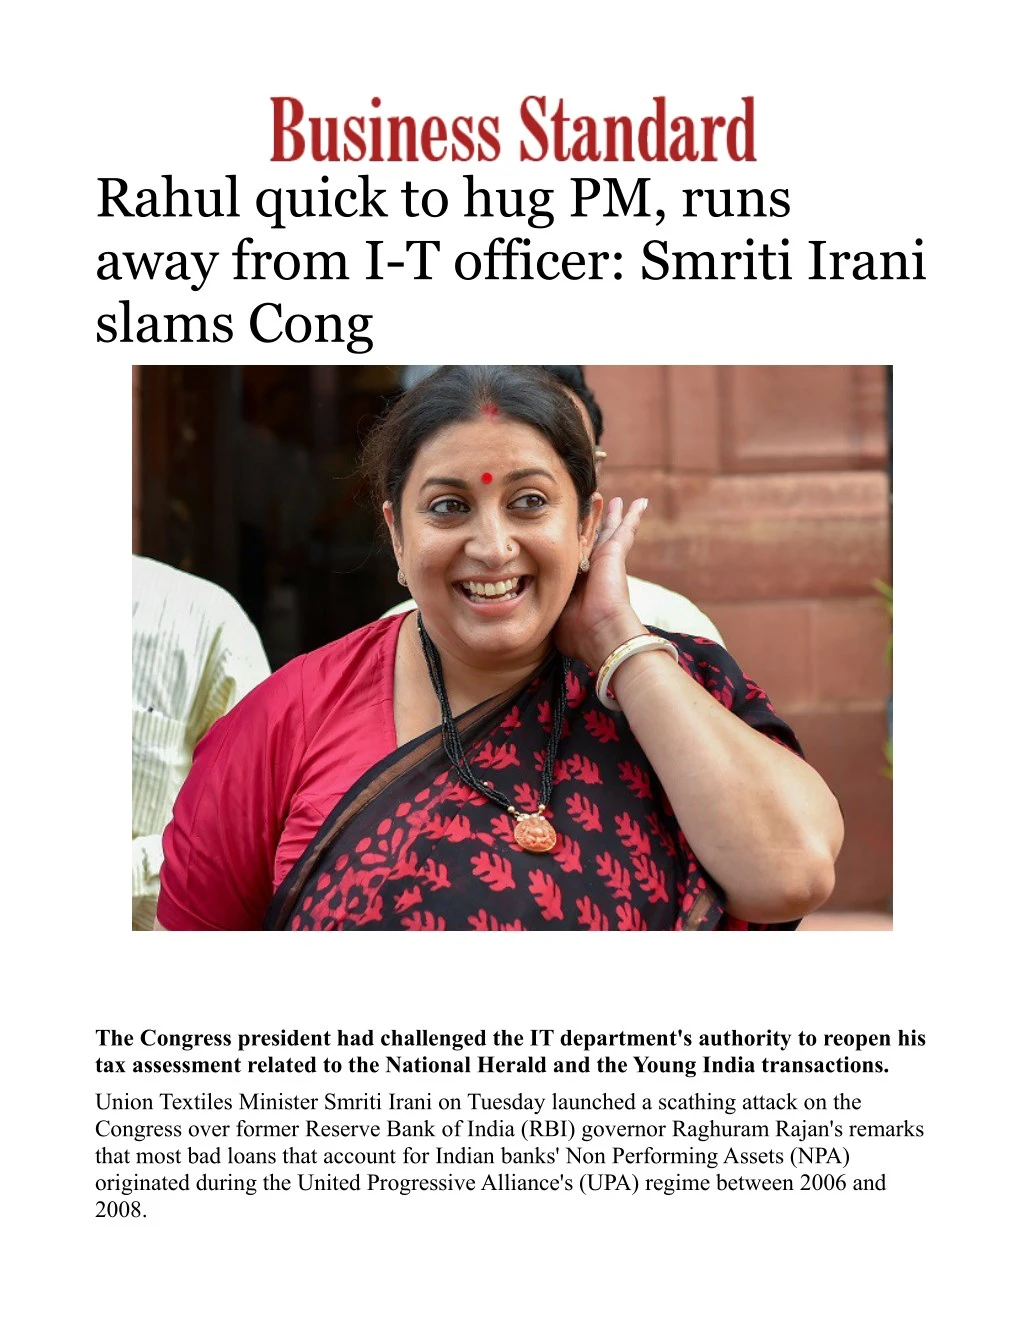 rahul quick to hug pm runs away from i t officer